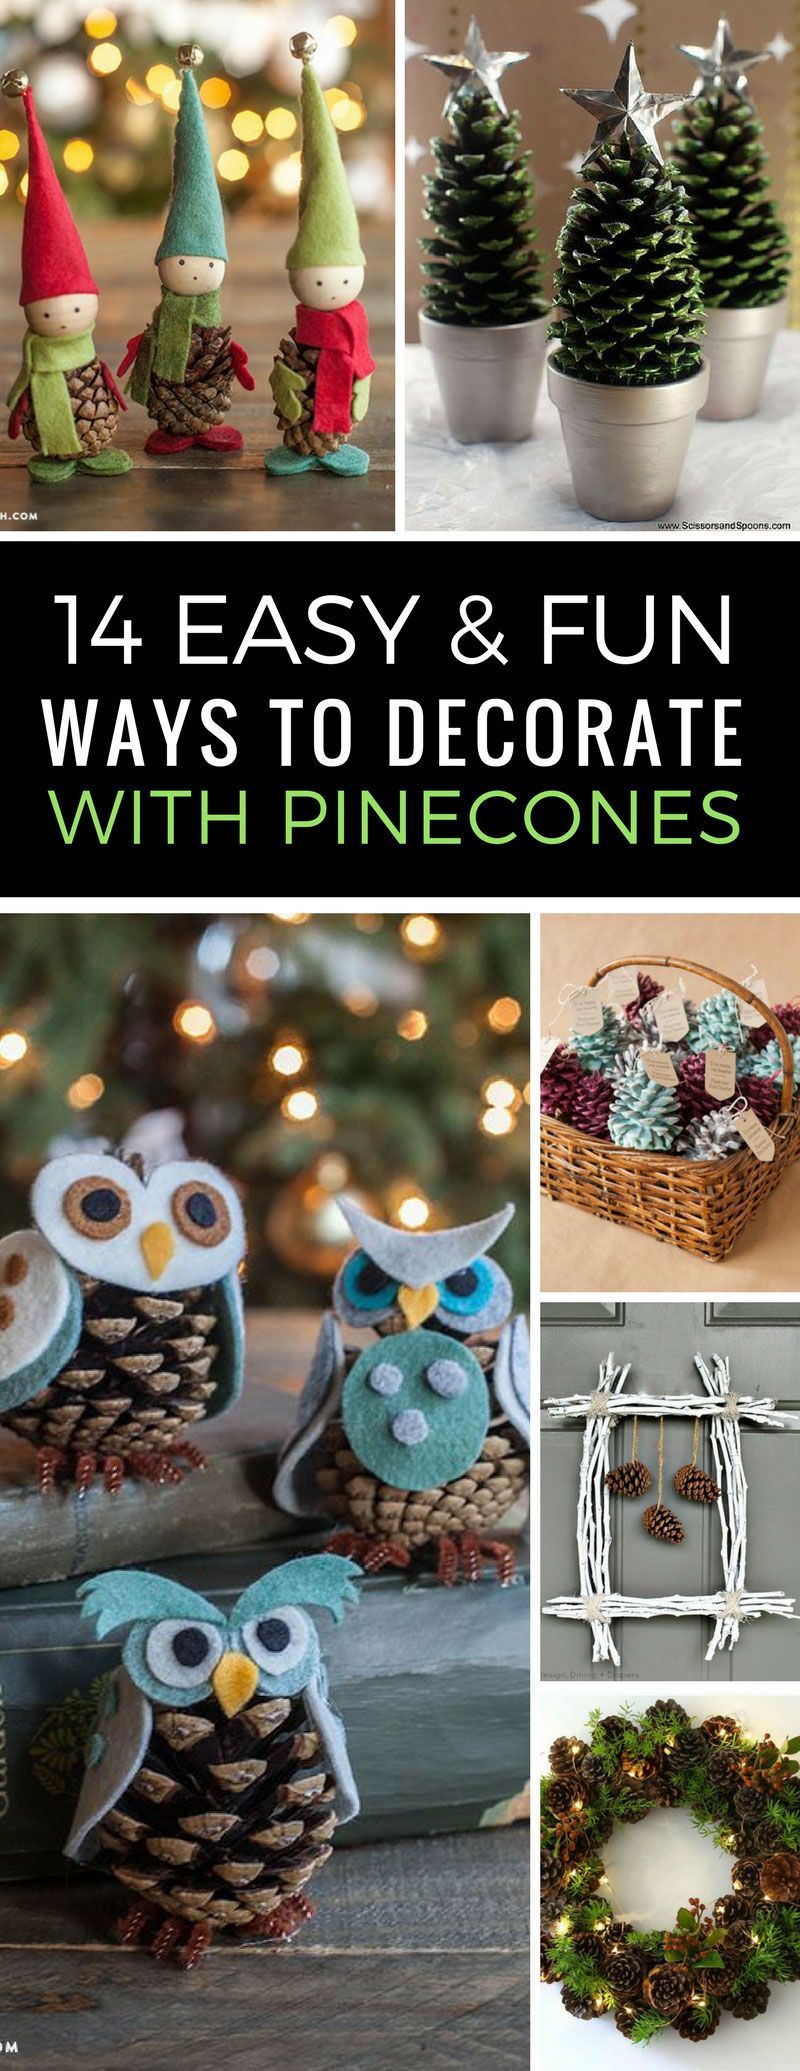 14 Easy Pinecone Crafts to Decorate Your Home this Christmas! -   25 pinecone crafts for children
 ideas